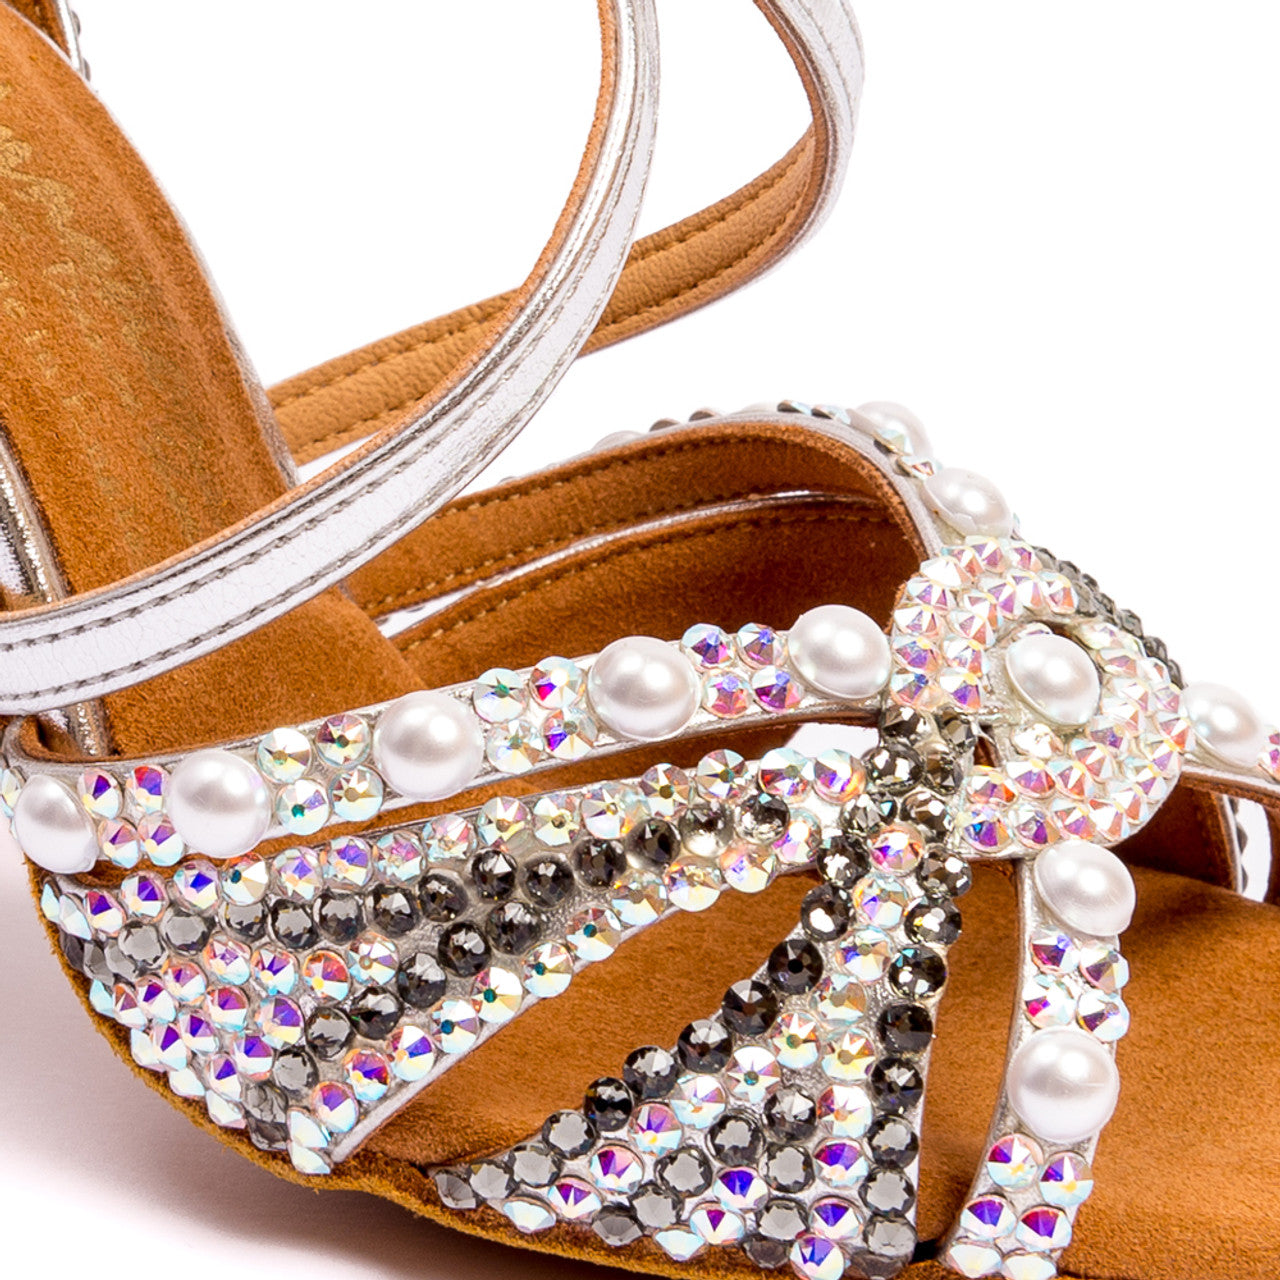 International Dance Shoes IDS Silver Mia Latin Dance Shoe by Lauren Covered in Preciosa Crystals and Pearls